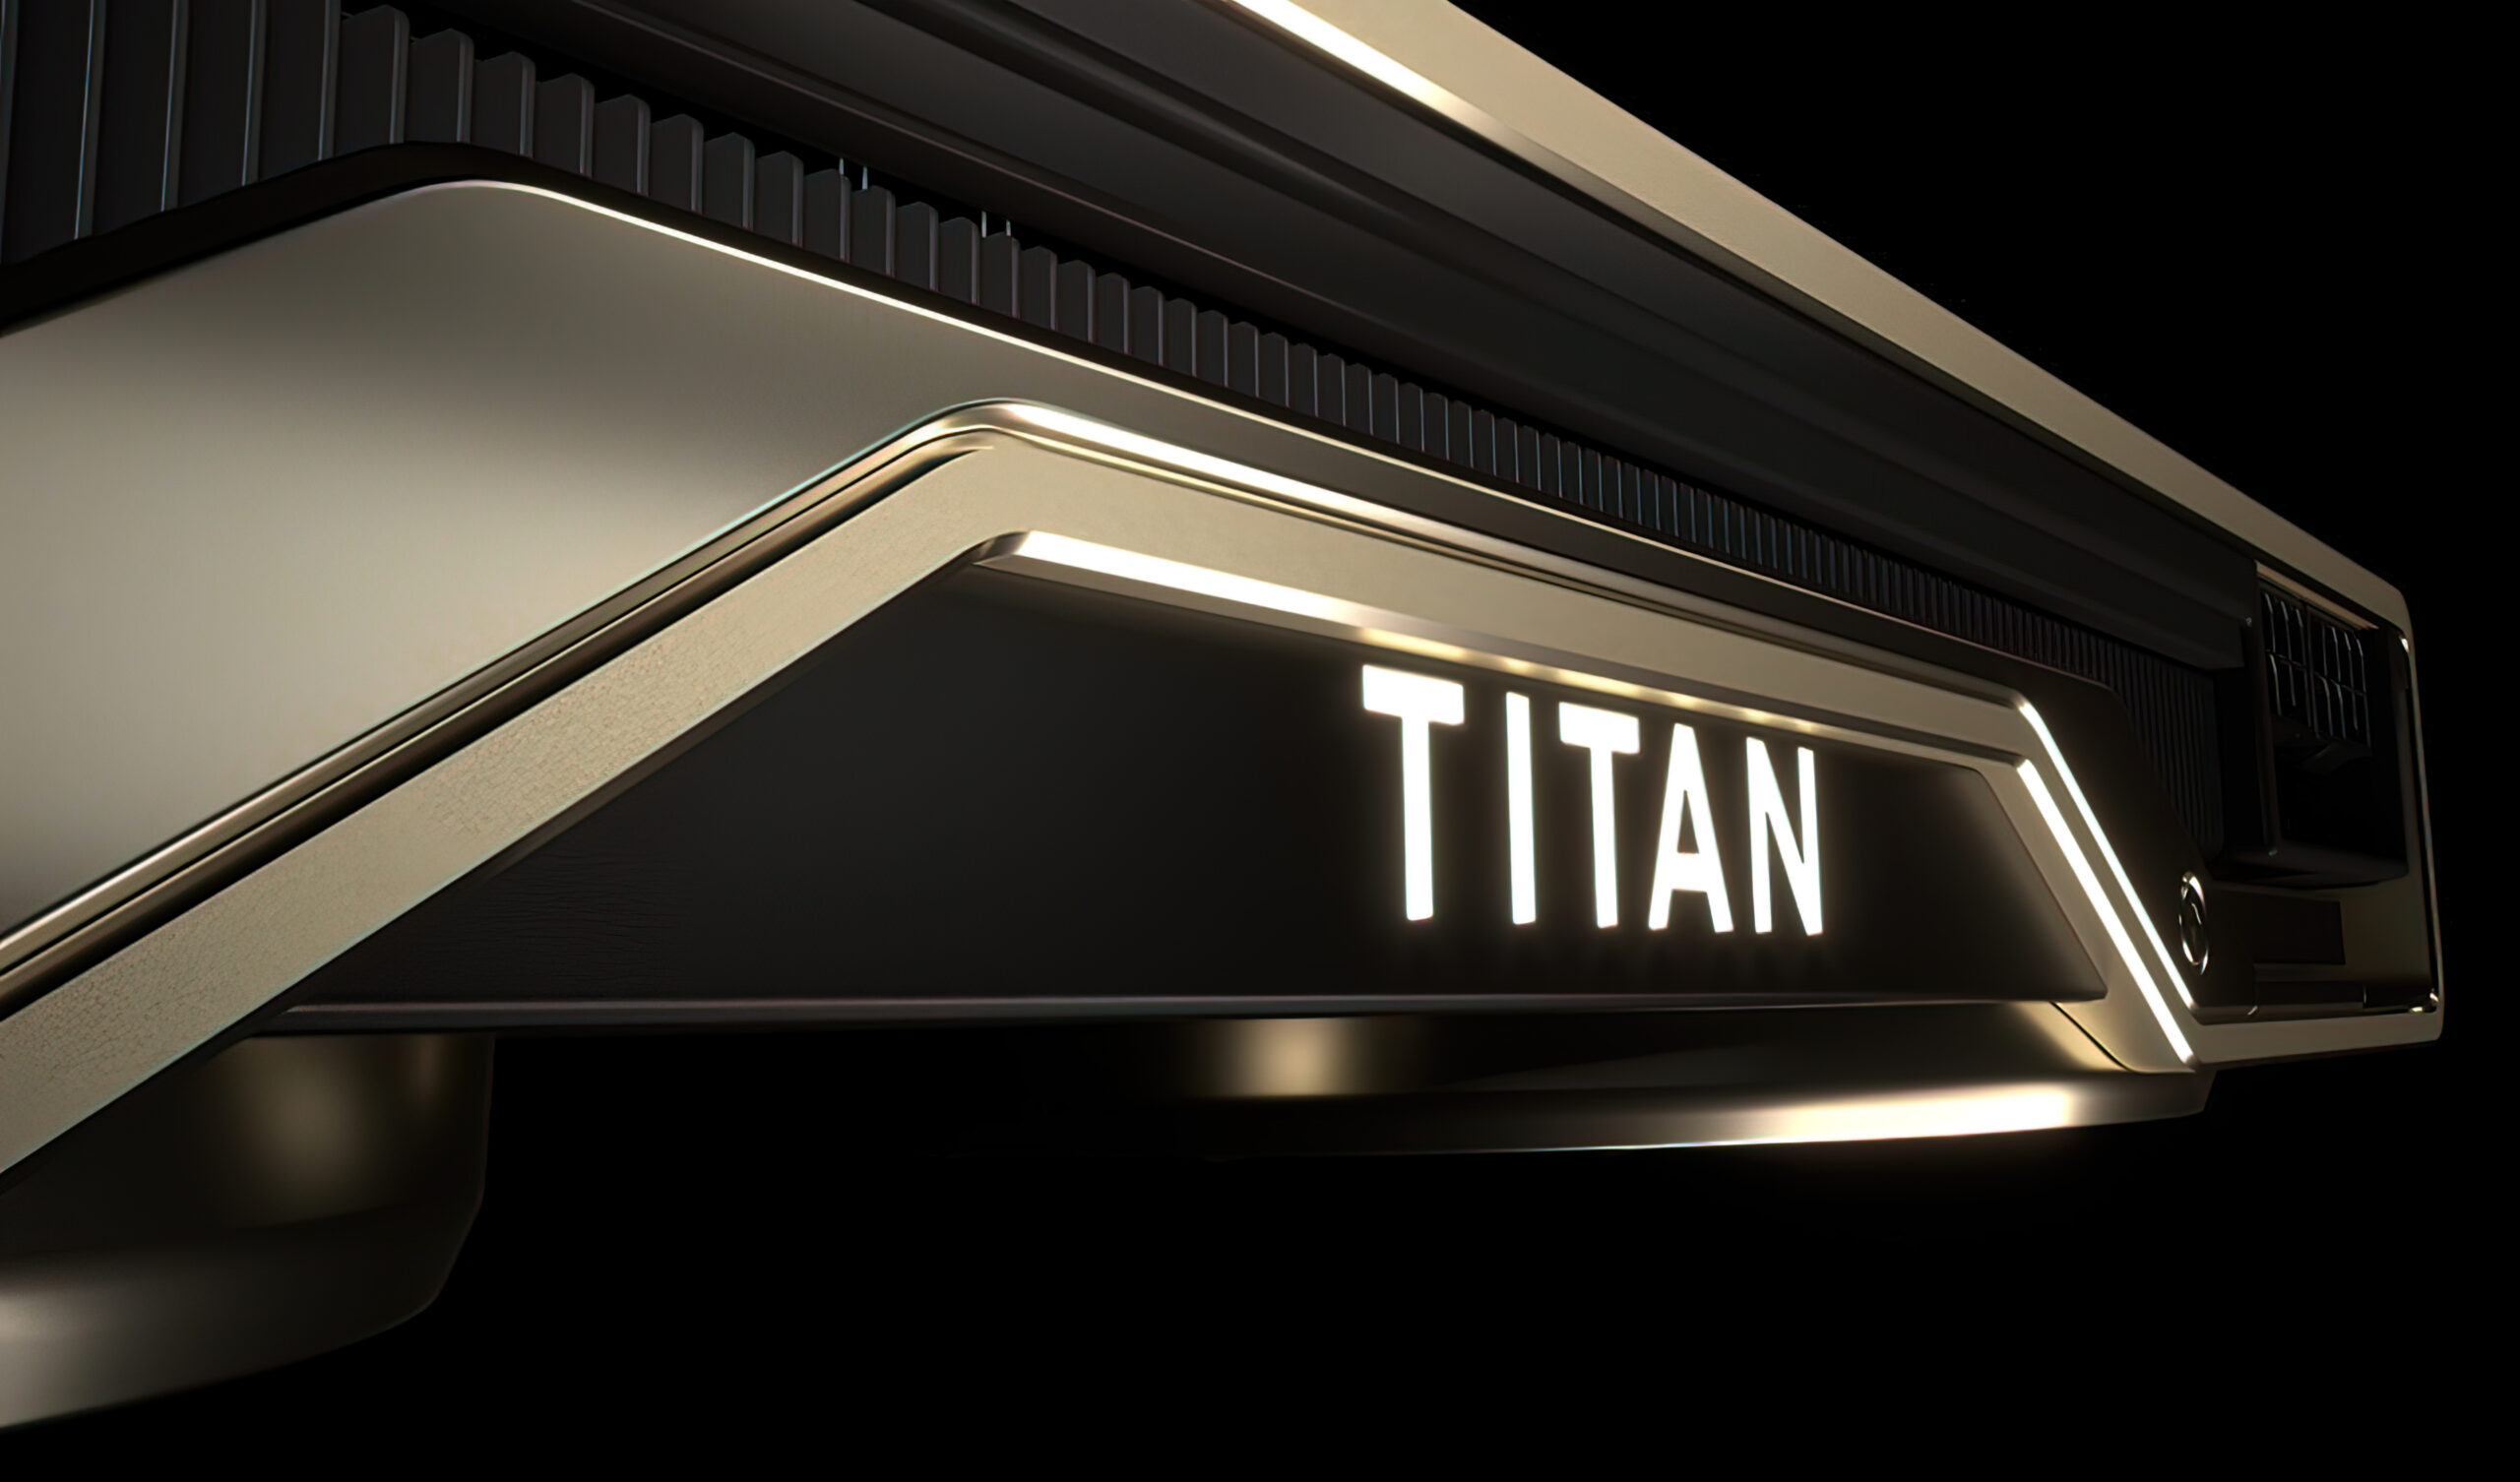 nvidia-titan-rtx-gallery-b-641-d@2x-very_compressed-scale-6_00x-scaled.jpg